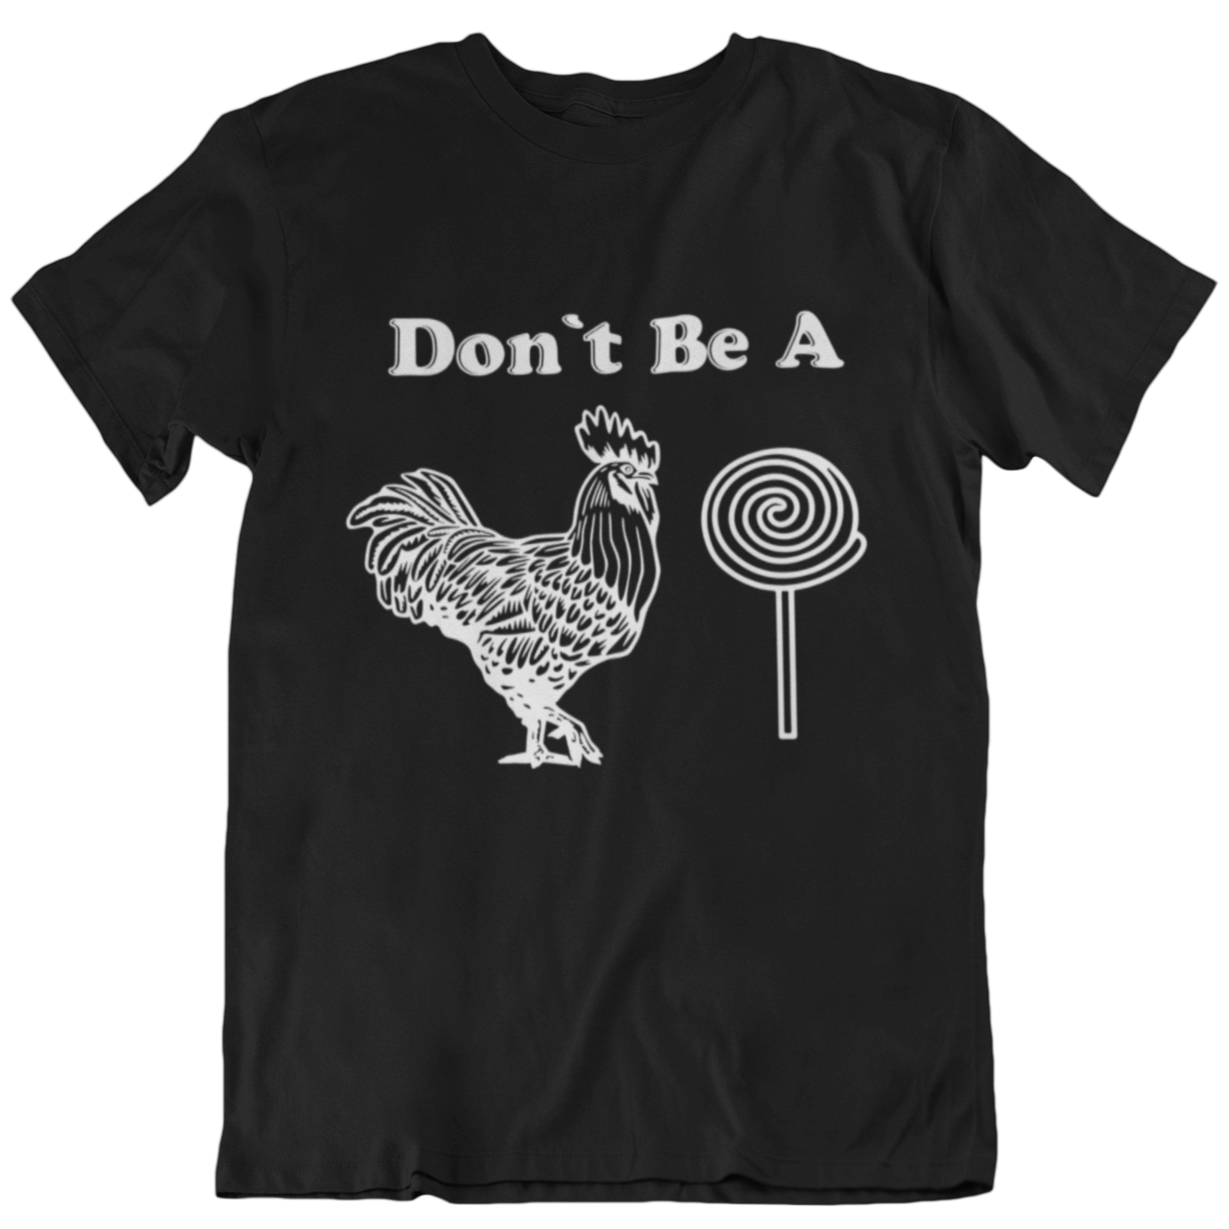 Black t-shirt for men with a play on words graphic featuring a rooster and a lollipop.